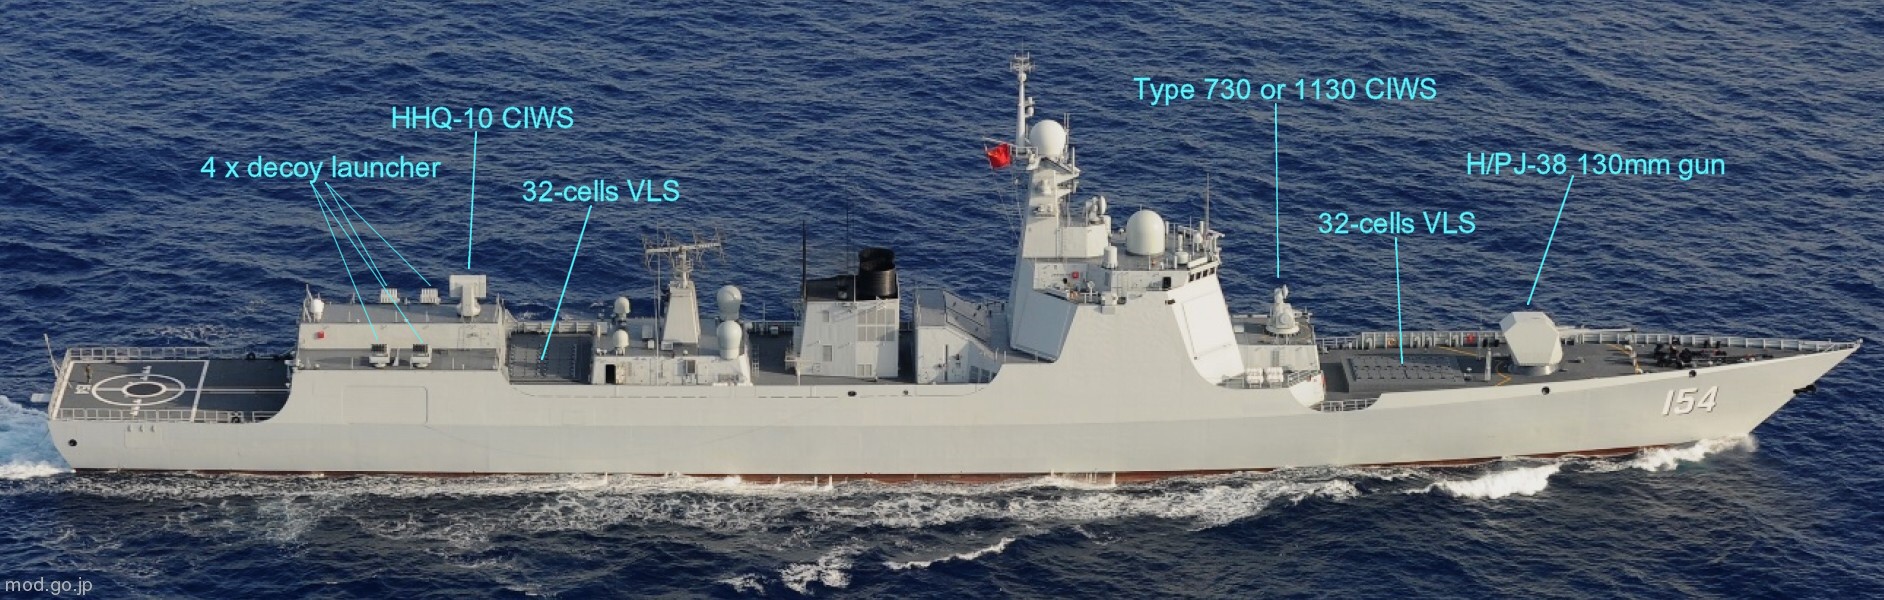 type 052d luyang class guided missile destroyer armament 64-cell vls 130mm gun type 730 hhq-10 ciws cecoy torpedo china plan